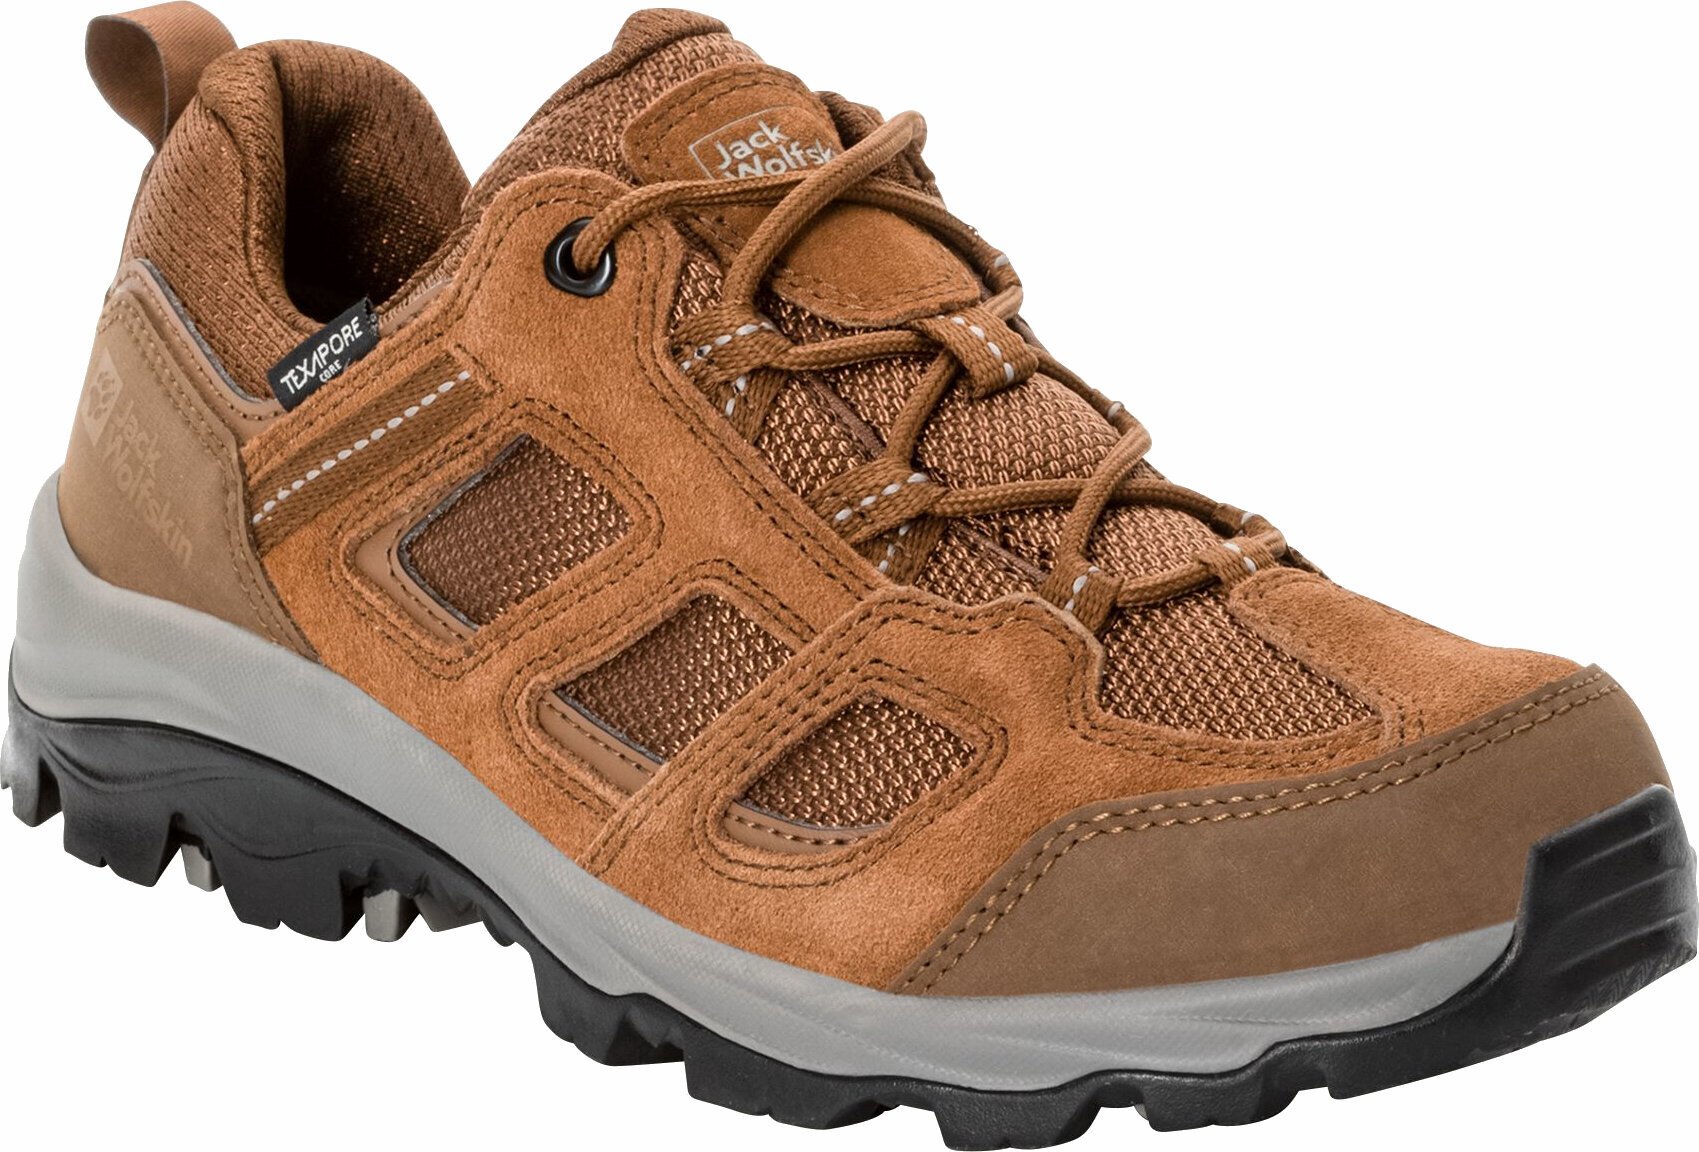 Womens Outdoor Shoes Jack Wolfskin Vojo 3 Texapore Low W Squirrel 37 Womens Outdoor Shoes